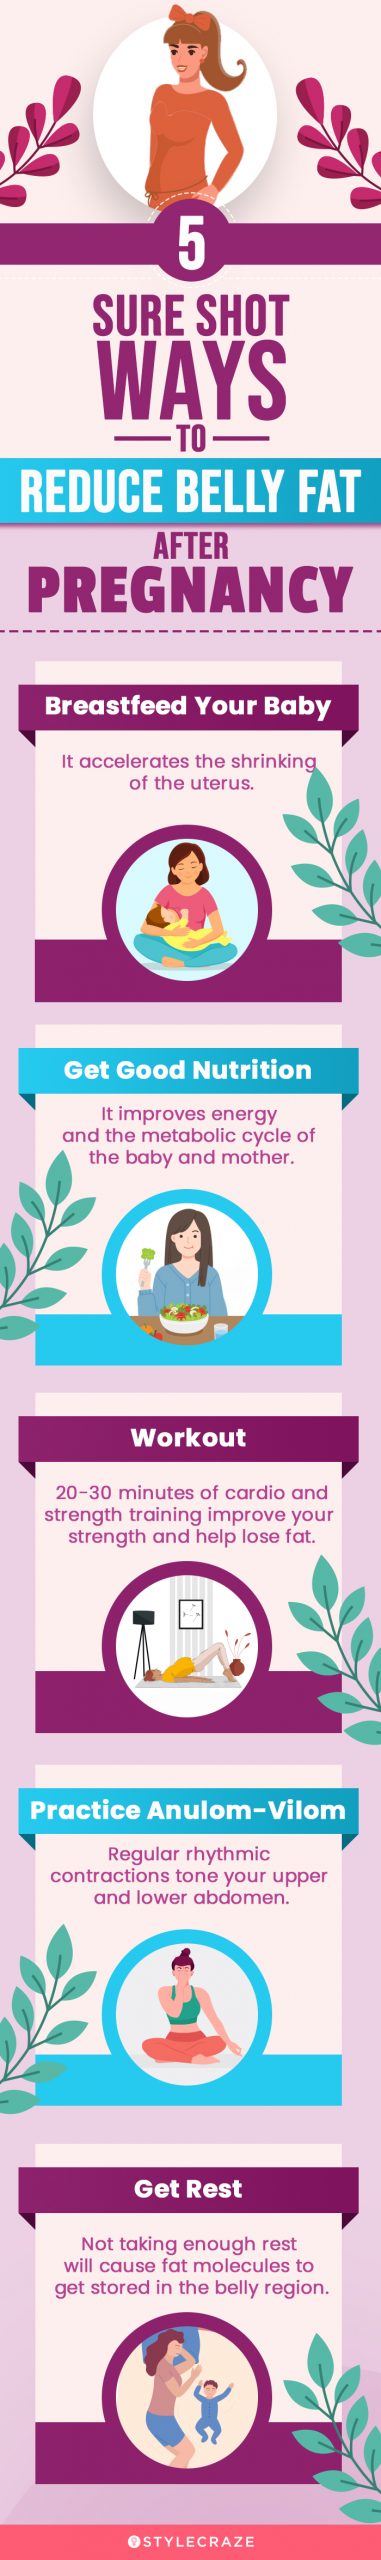 5 sure shot ways to reduce belly fat after pregnancy (infographic)